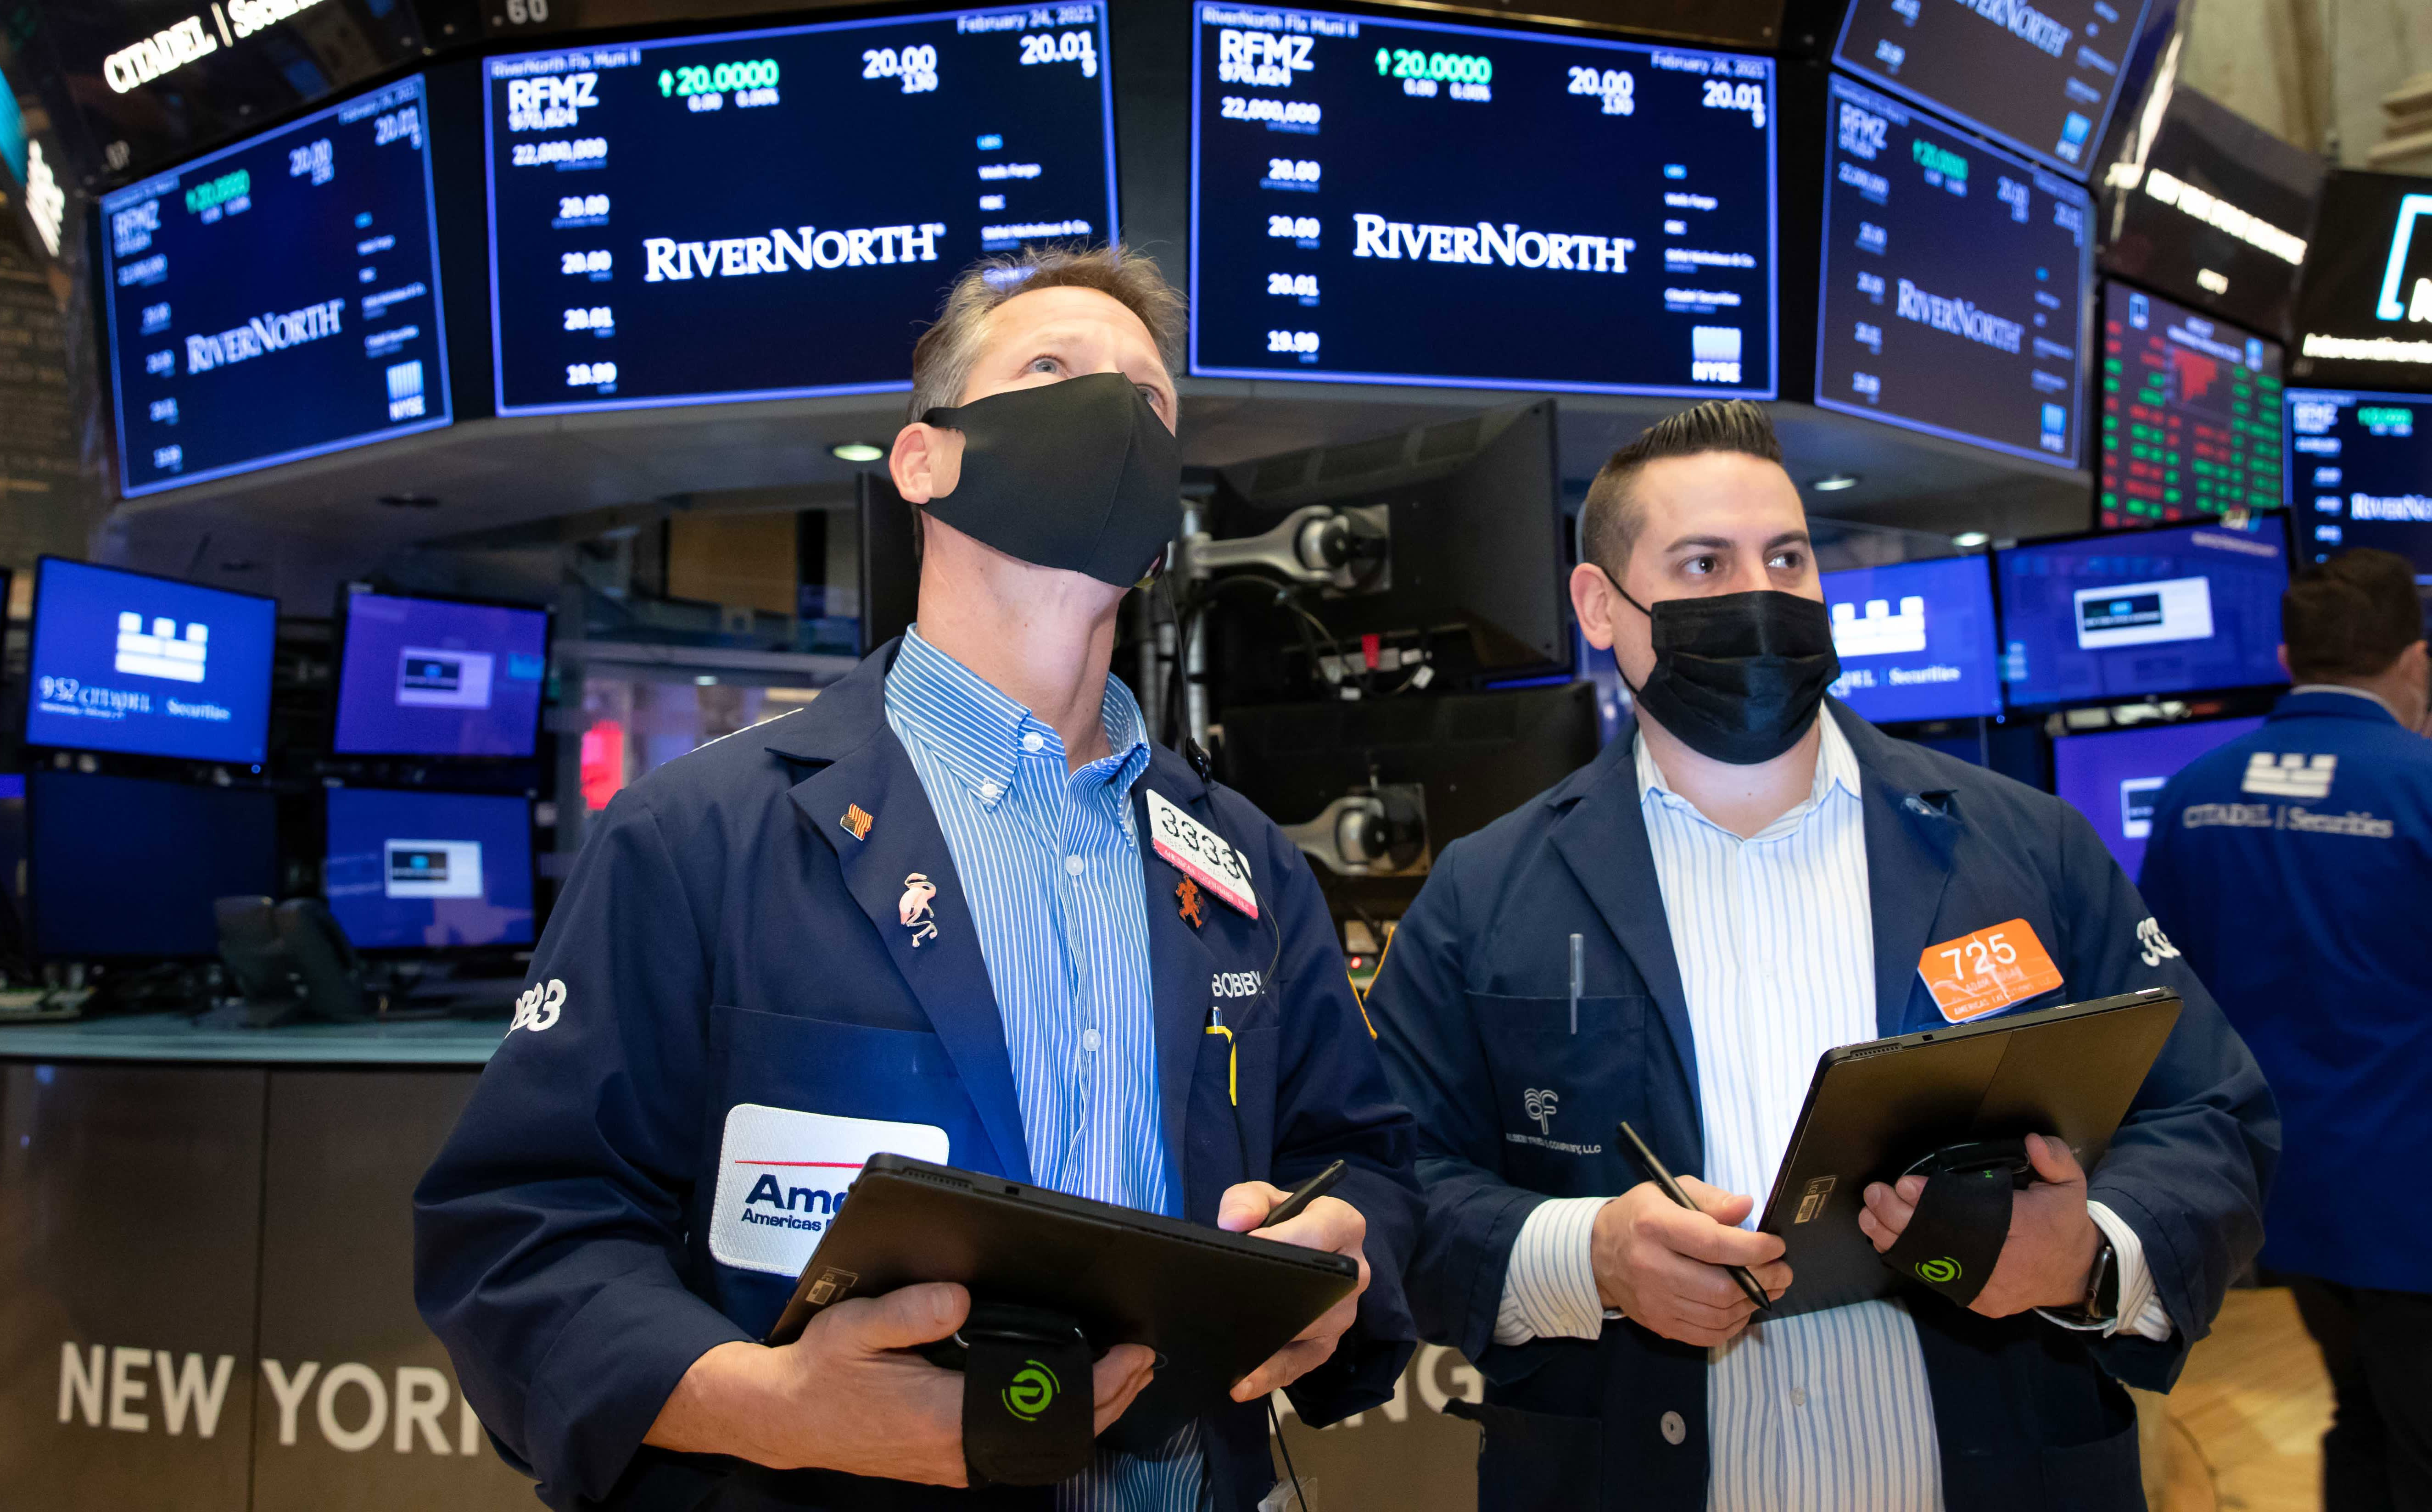 5 things to know before the stock market opened on February 26, 2021